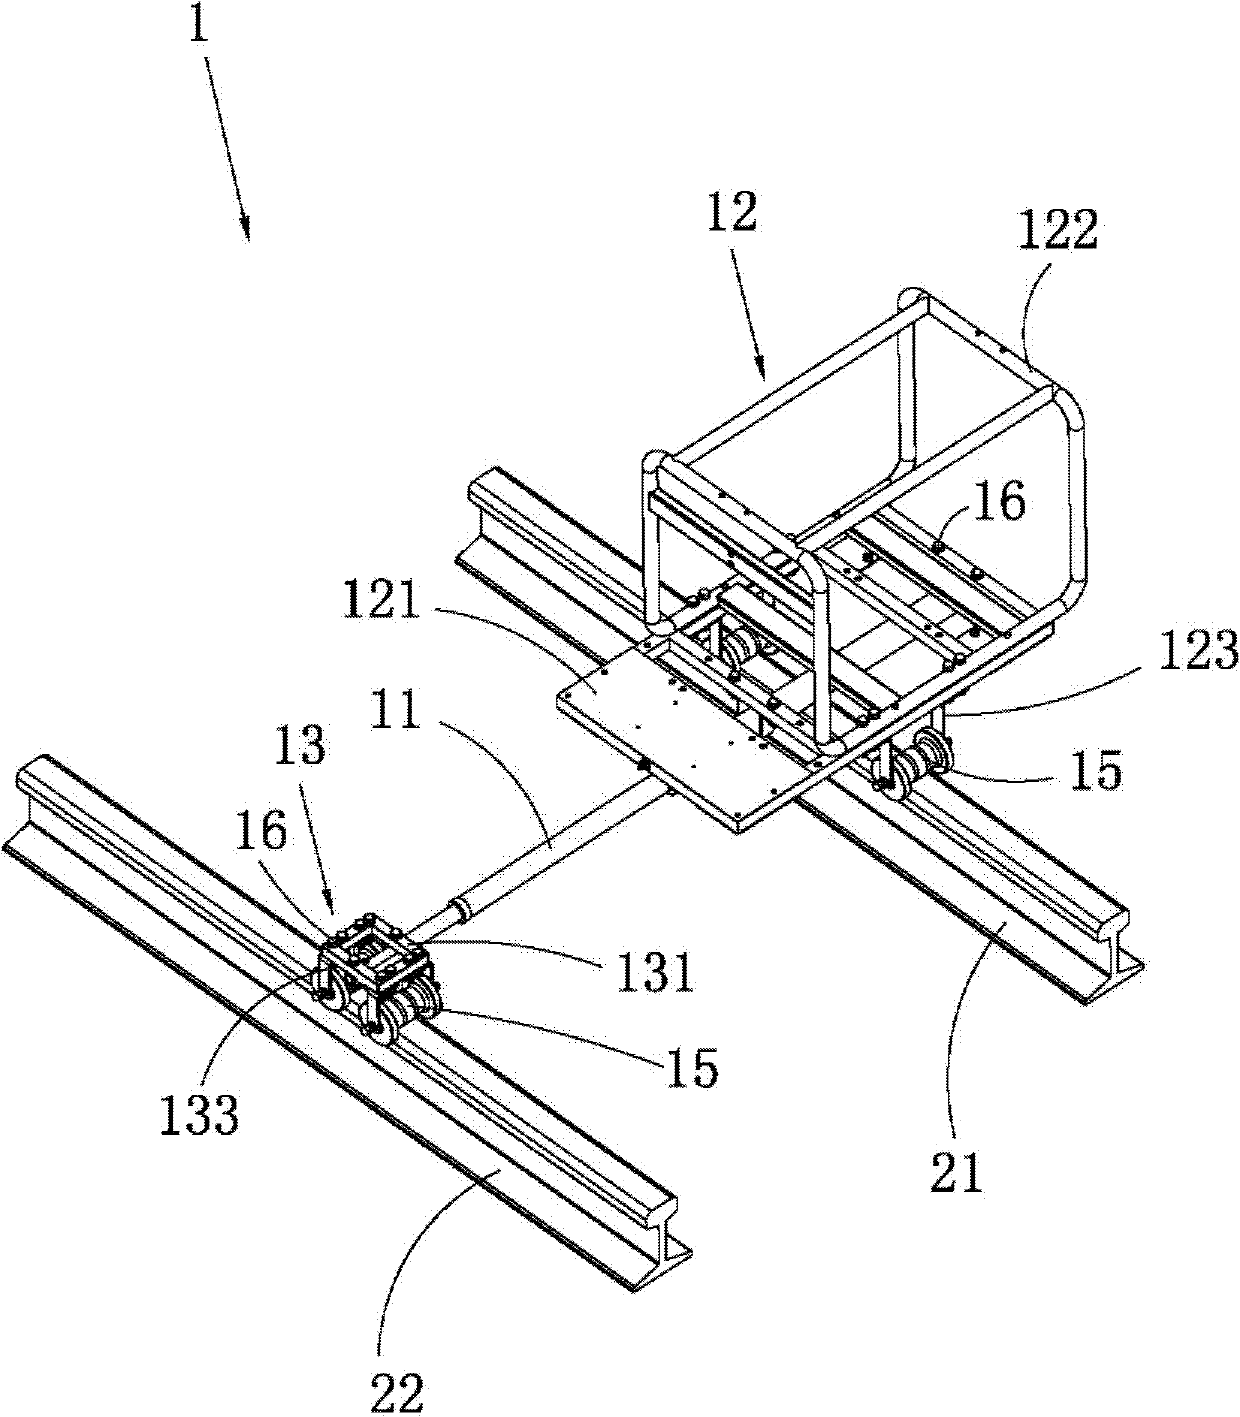 Double-track running device